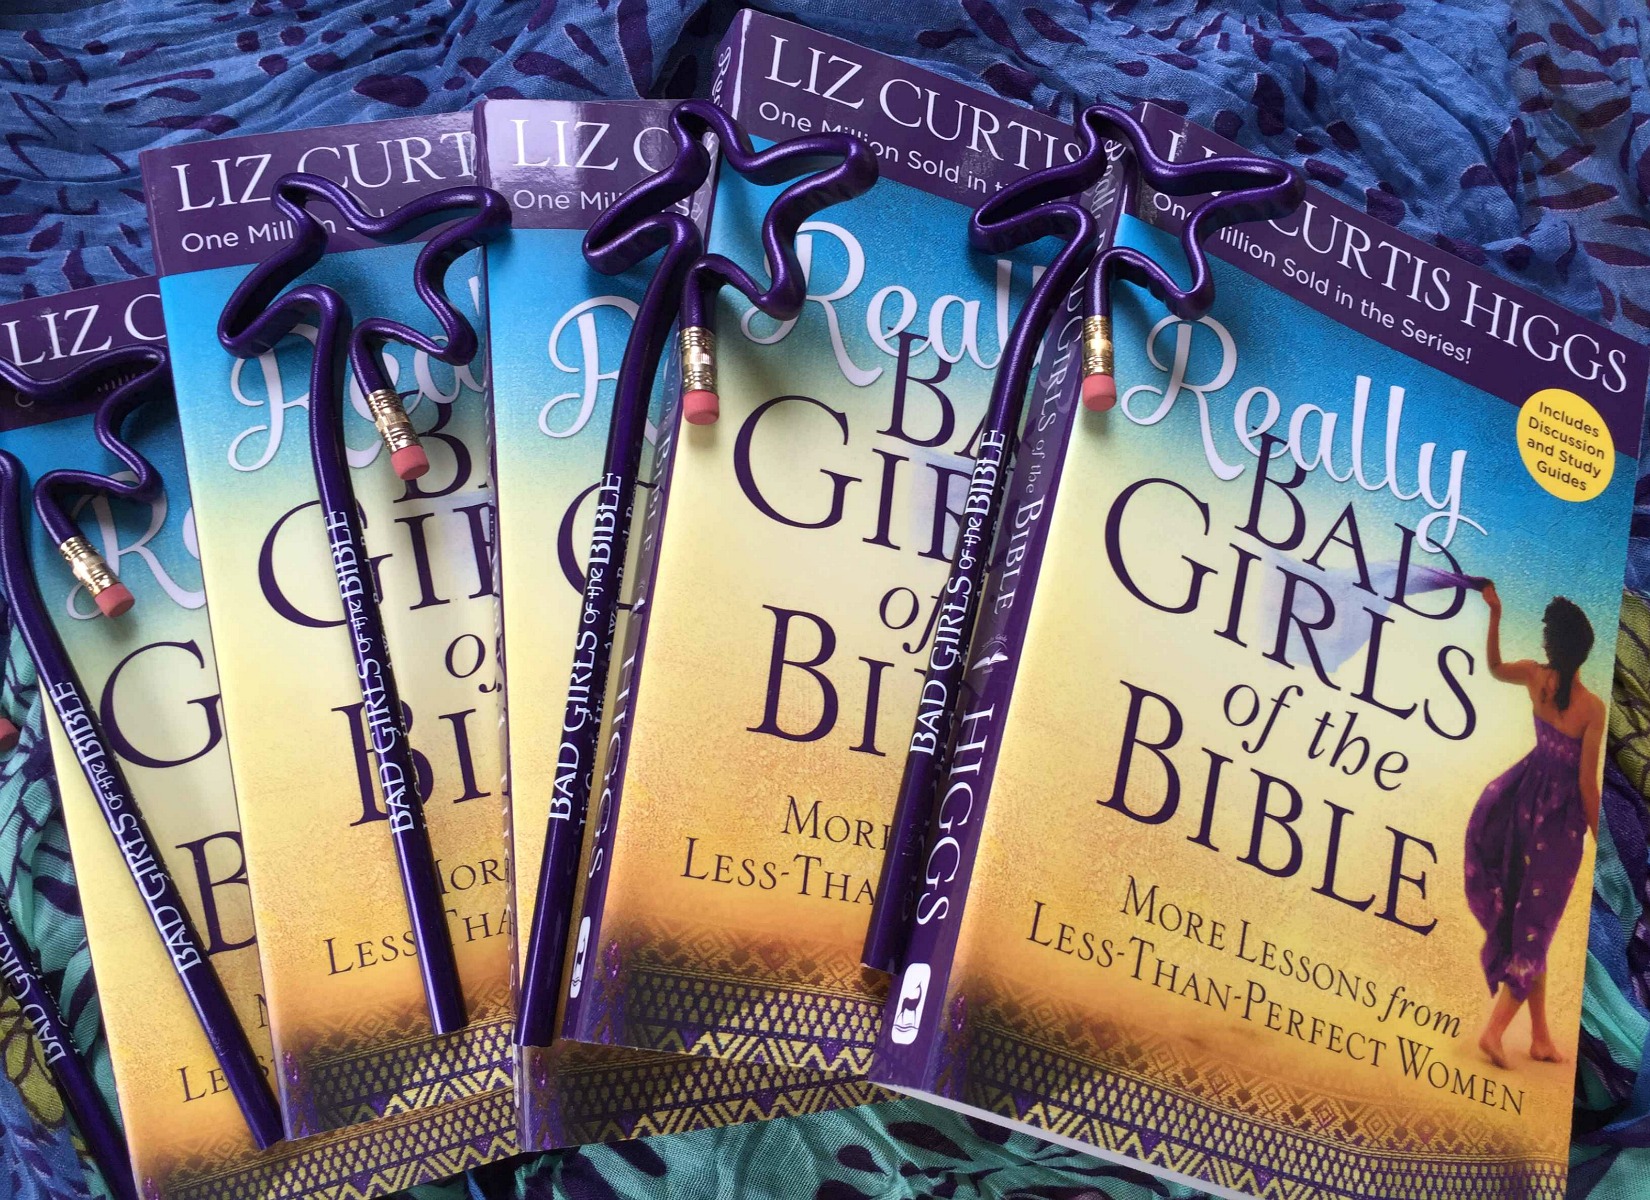 Really Bad Girls of the Bible 2016